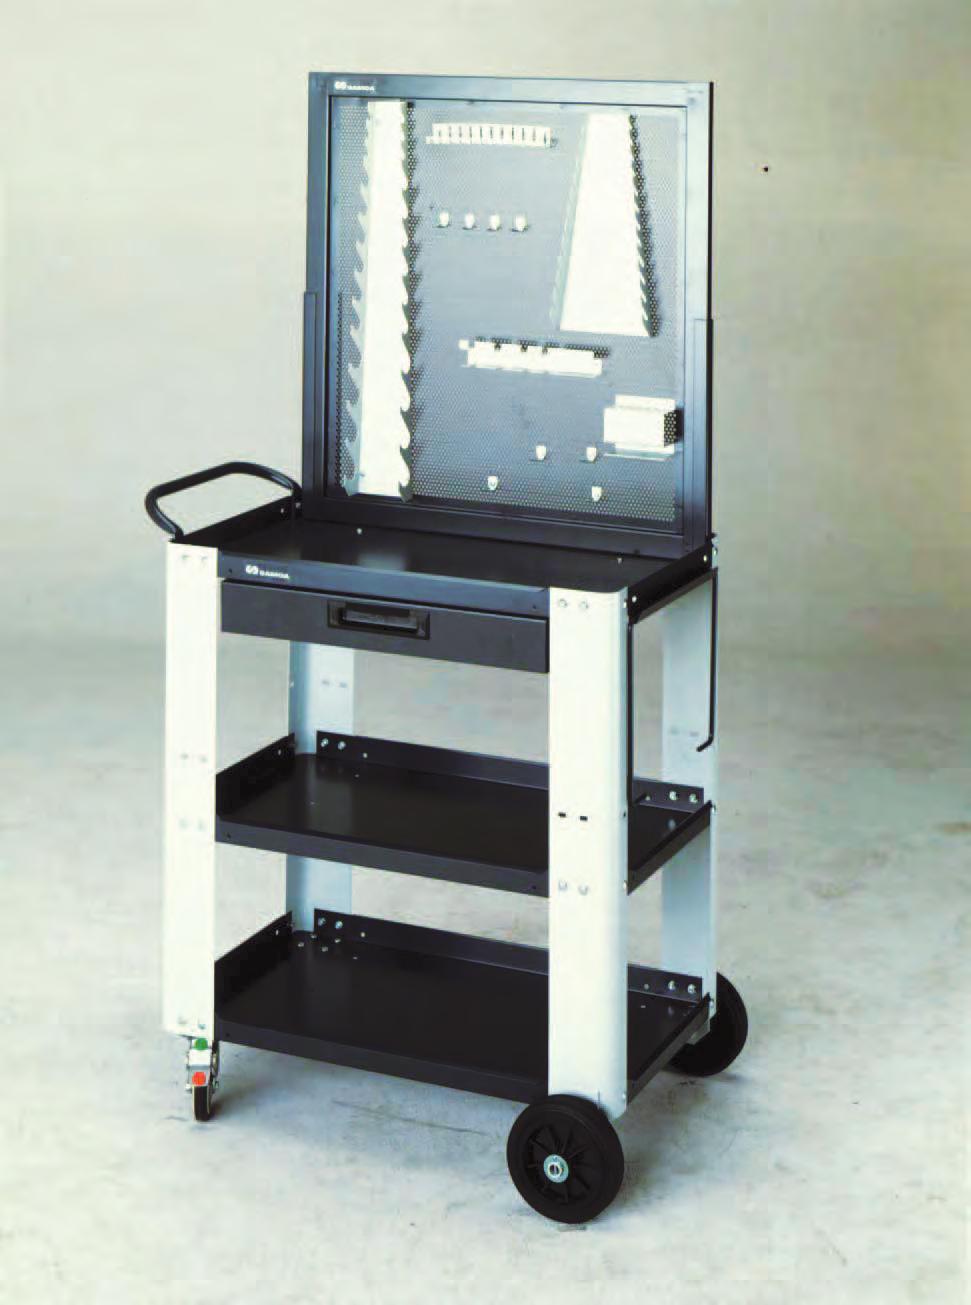 Complete service Cart with Heavy Duty tool Board Bring your special tools to your workspace Heavy duty service cart 30" wide, 18" deep, 33" high.